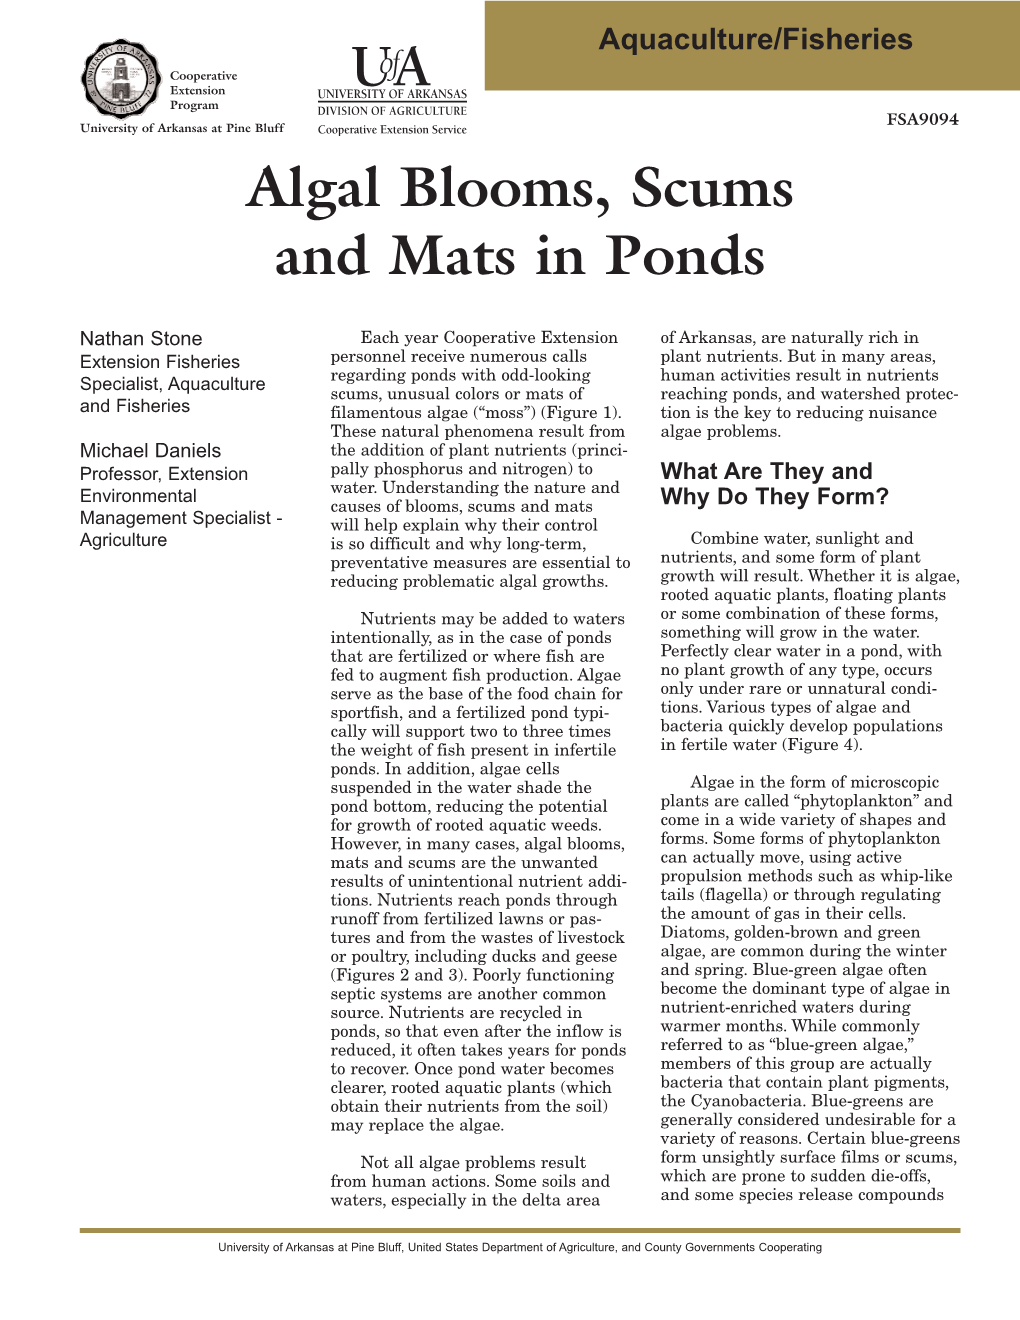 Algal Blooms, Scums and Mats in Ponds